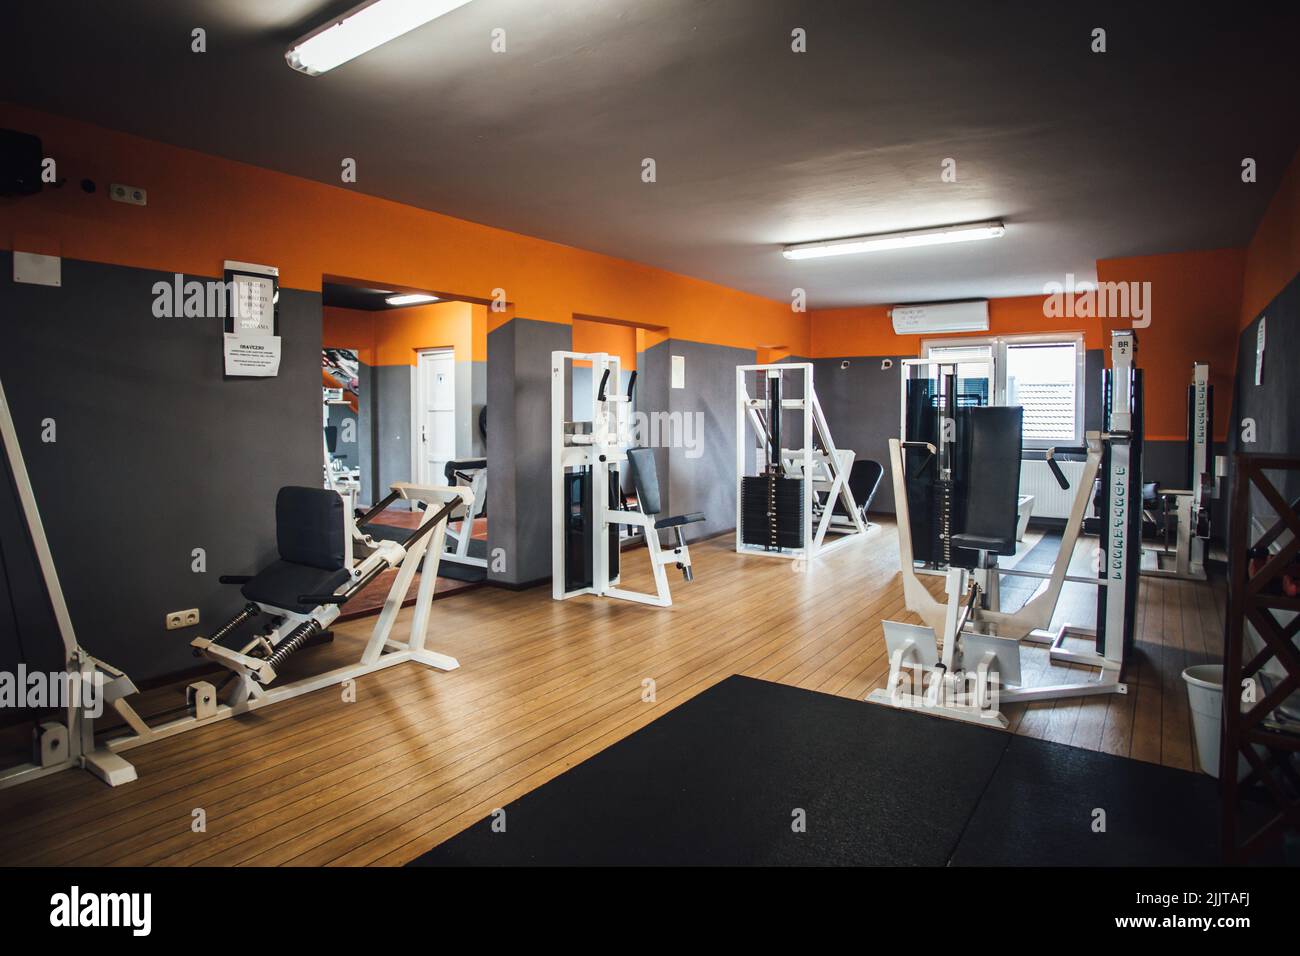 A wide angle shot of a modern body-building gym with training apparatus Stock Photo